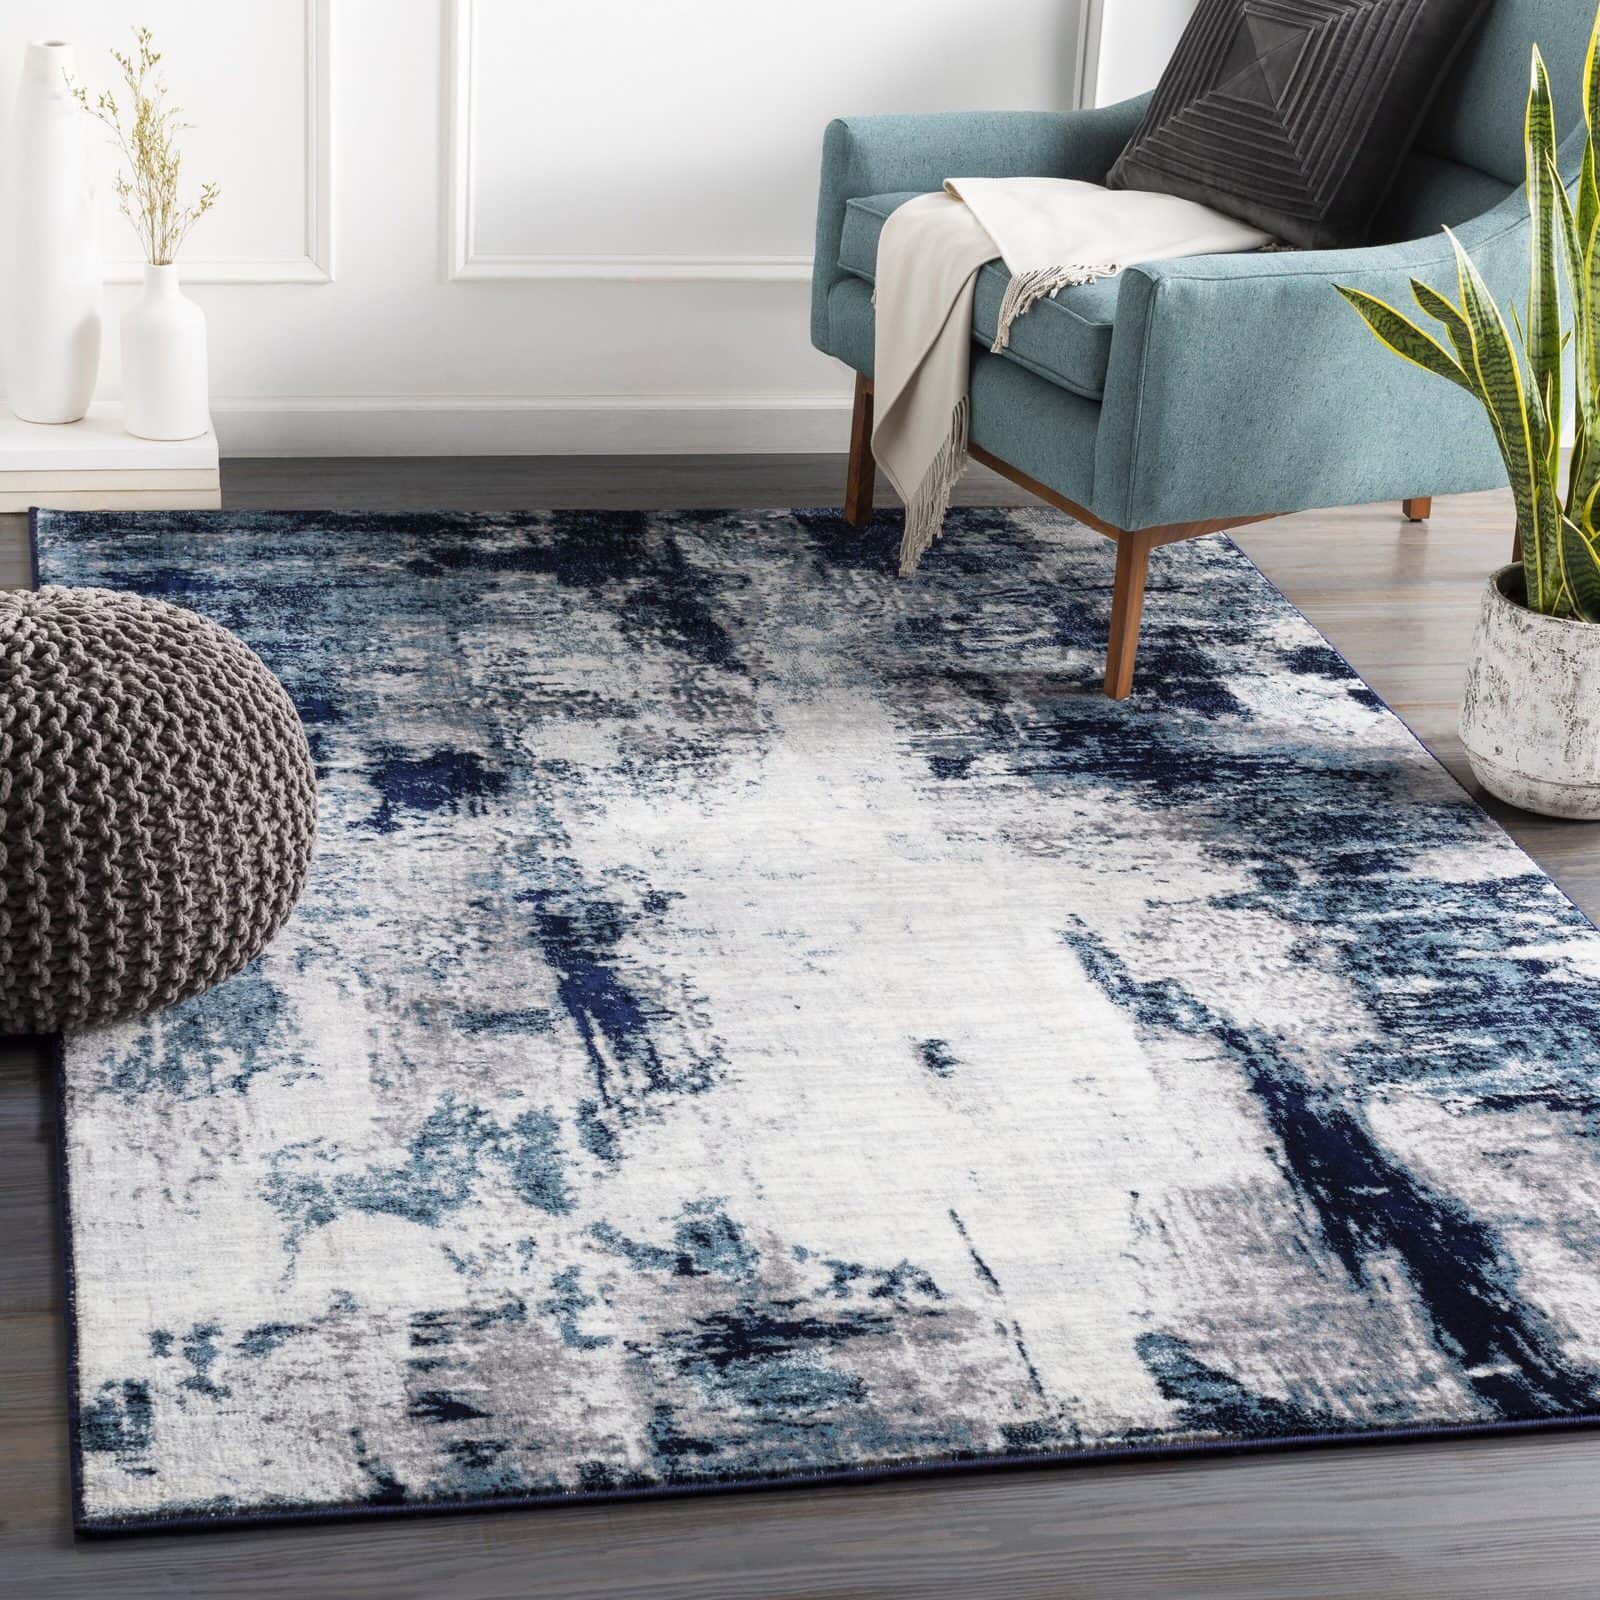 12 Best Navy Blue And White Rugs, Blue Grey Rug